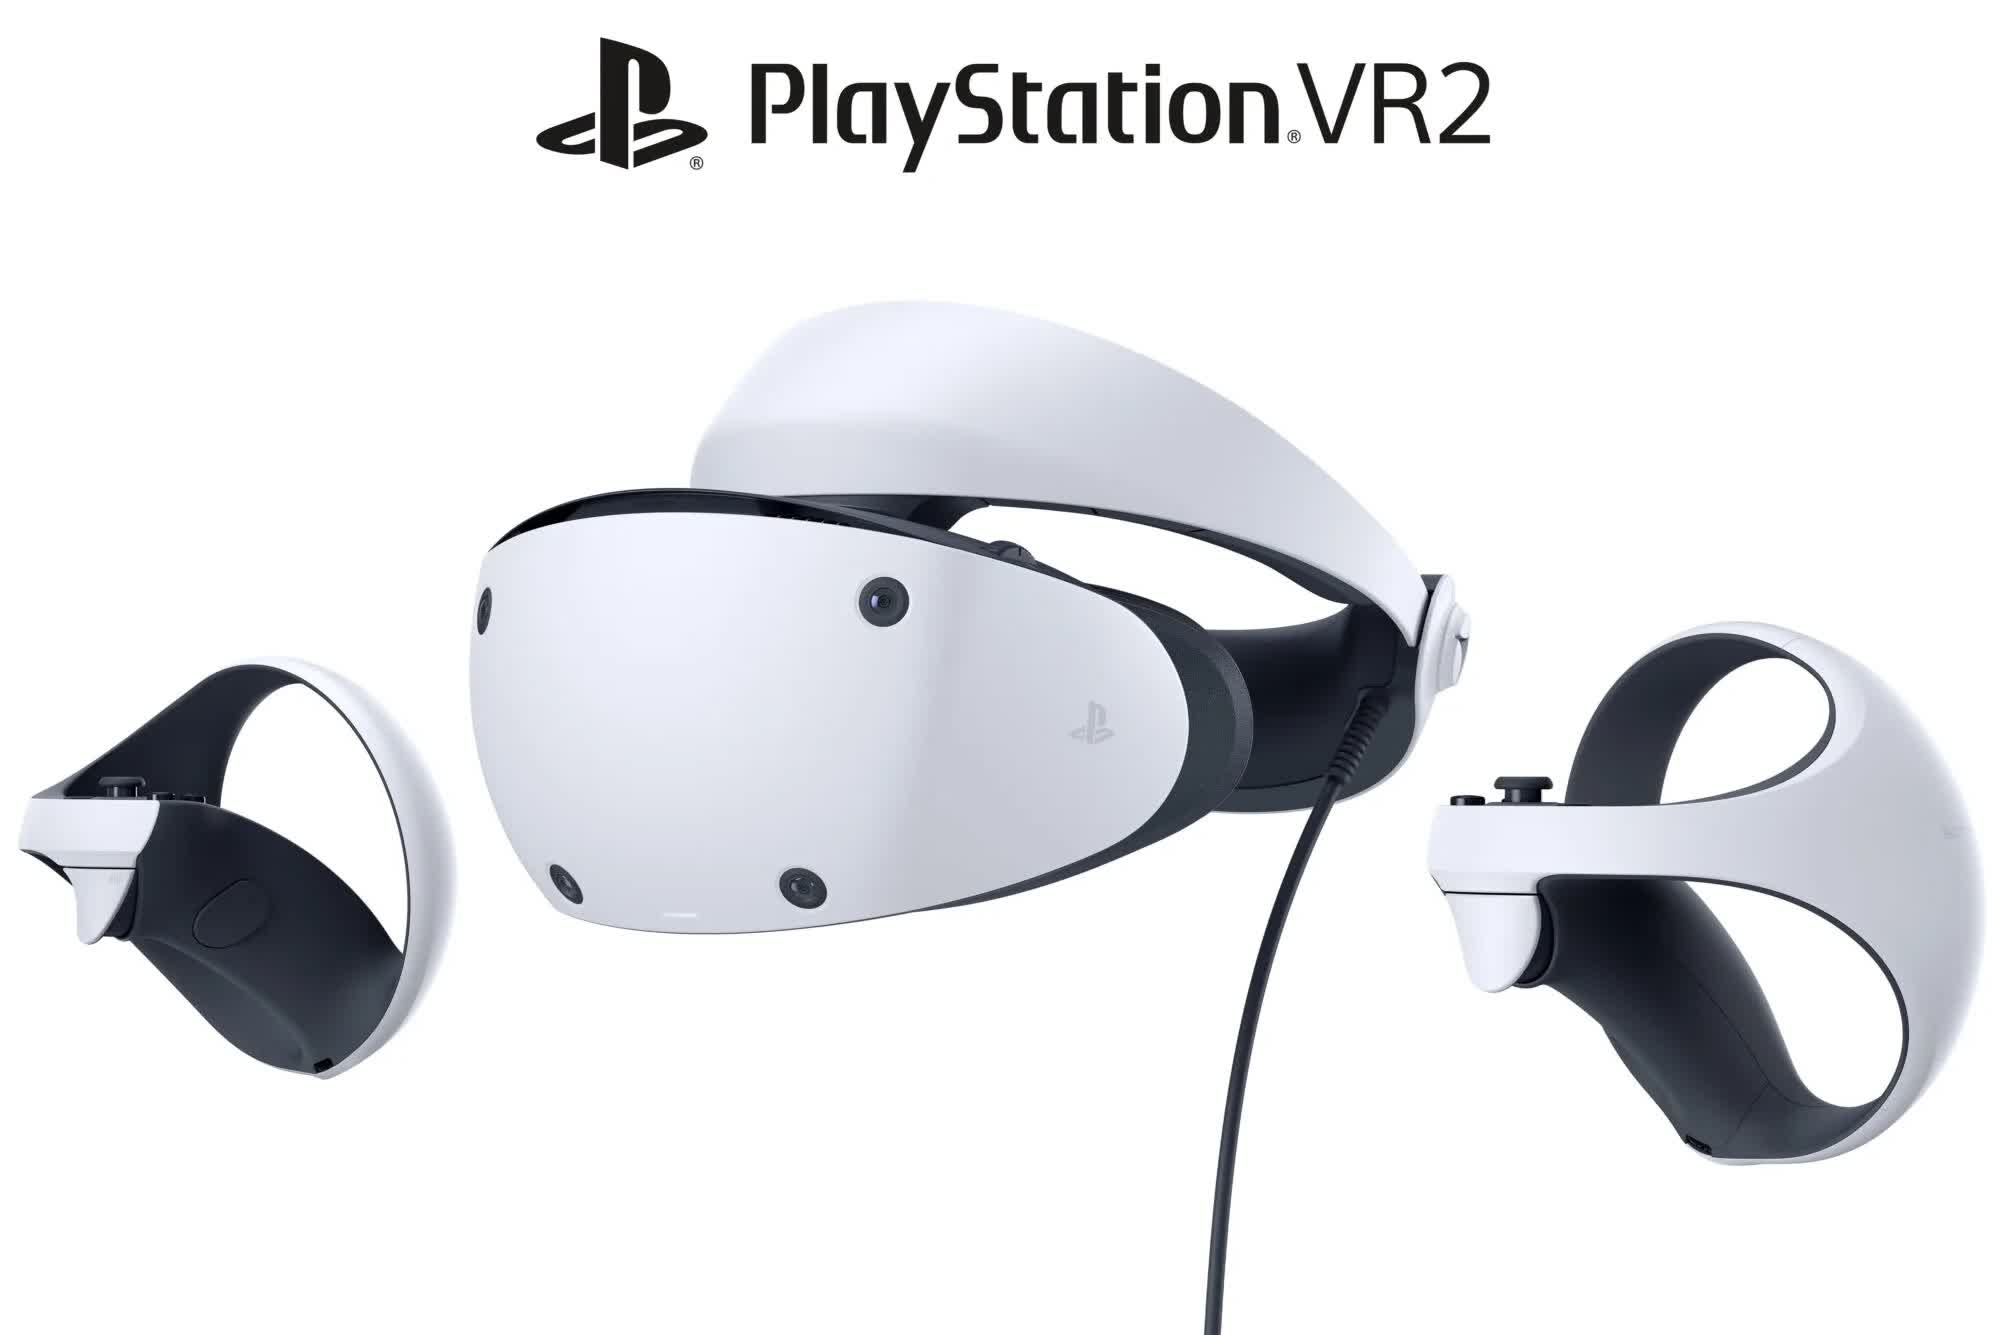 Sony unveils slimmer and lighter PlayStation VR2 and Scene controllers